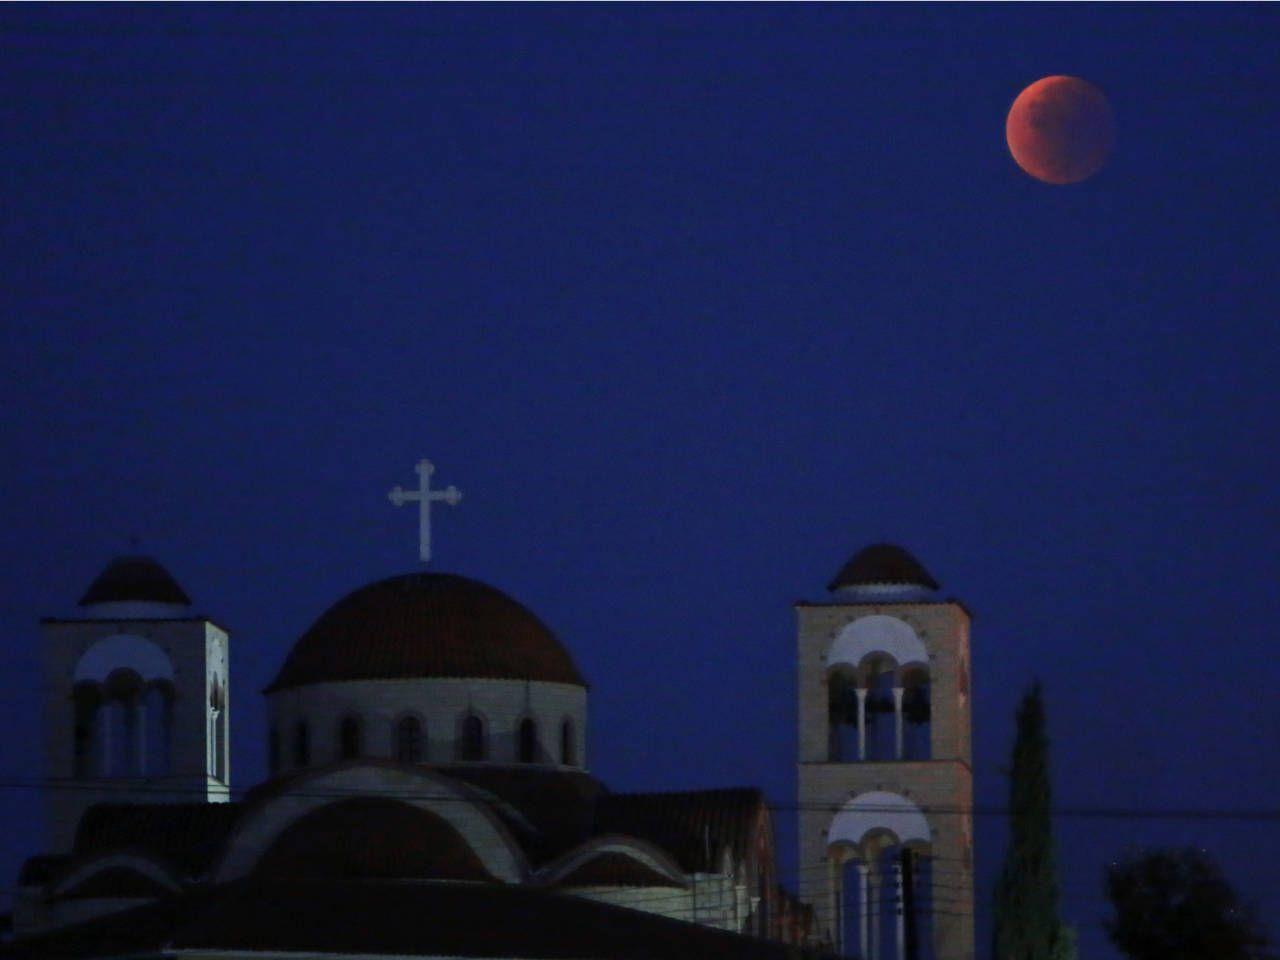 Blood moon magic amazing Wallpaper of the supermoon around the